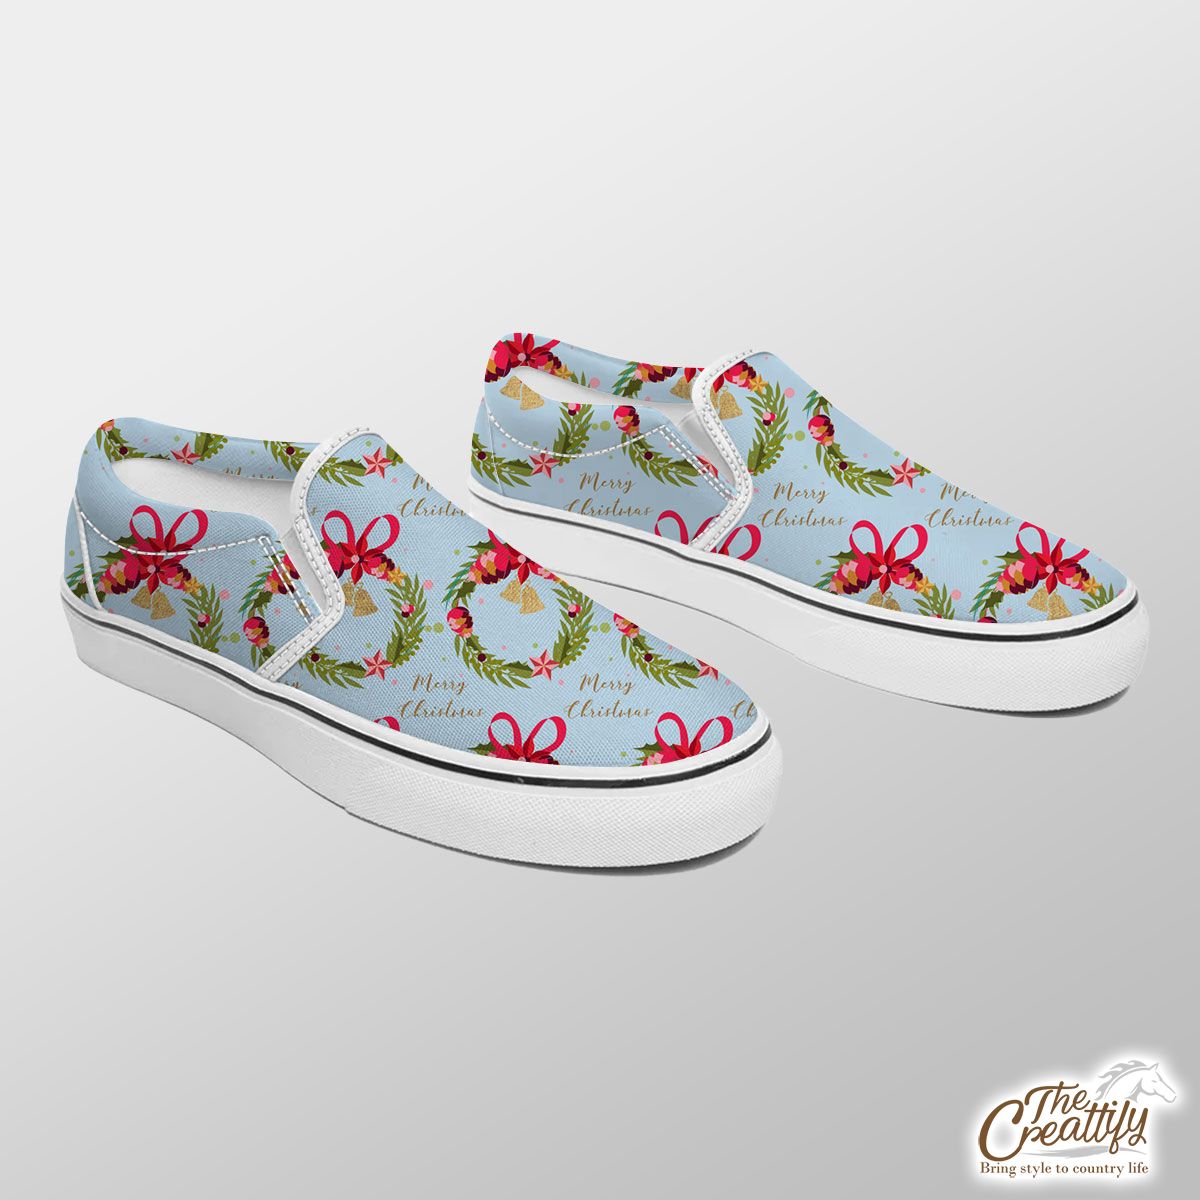 Christmas Wreath, Christmas Wreath Bows And Bells Slip On Sneakers